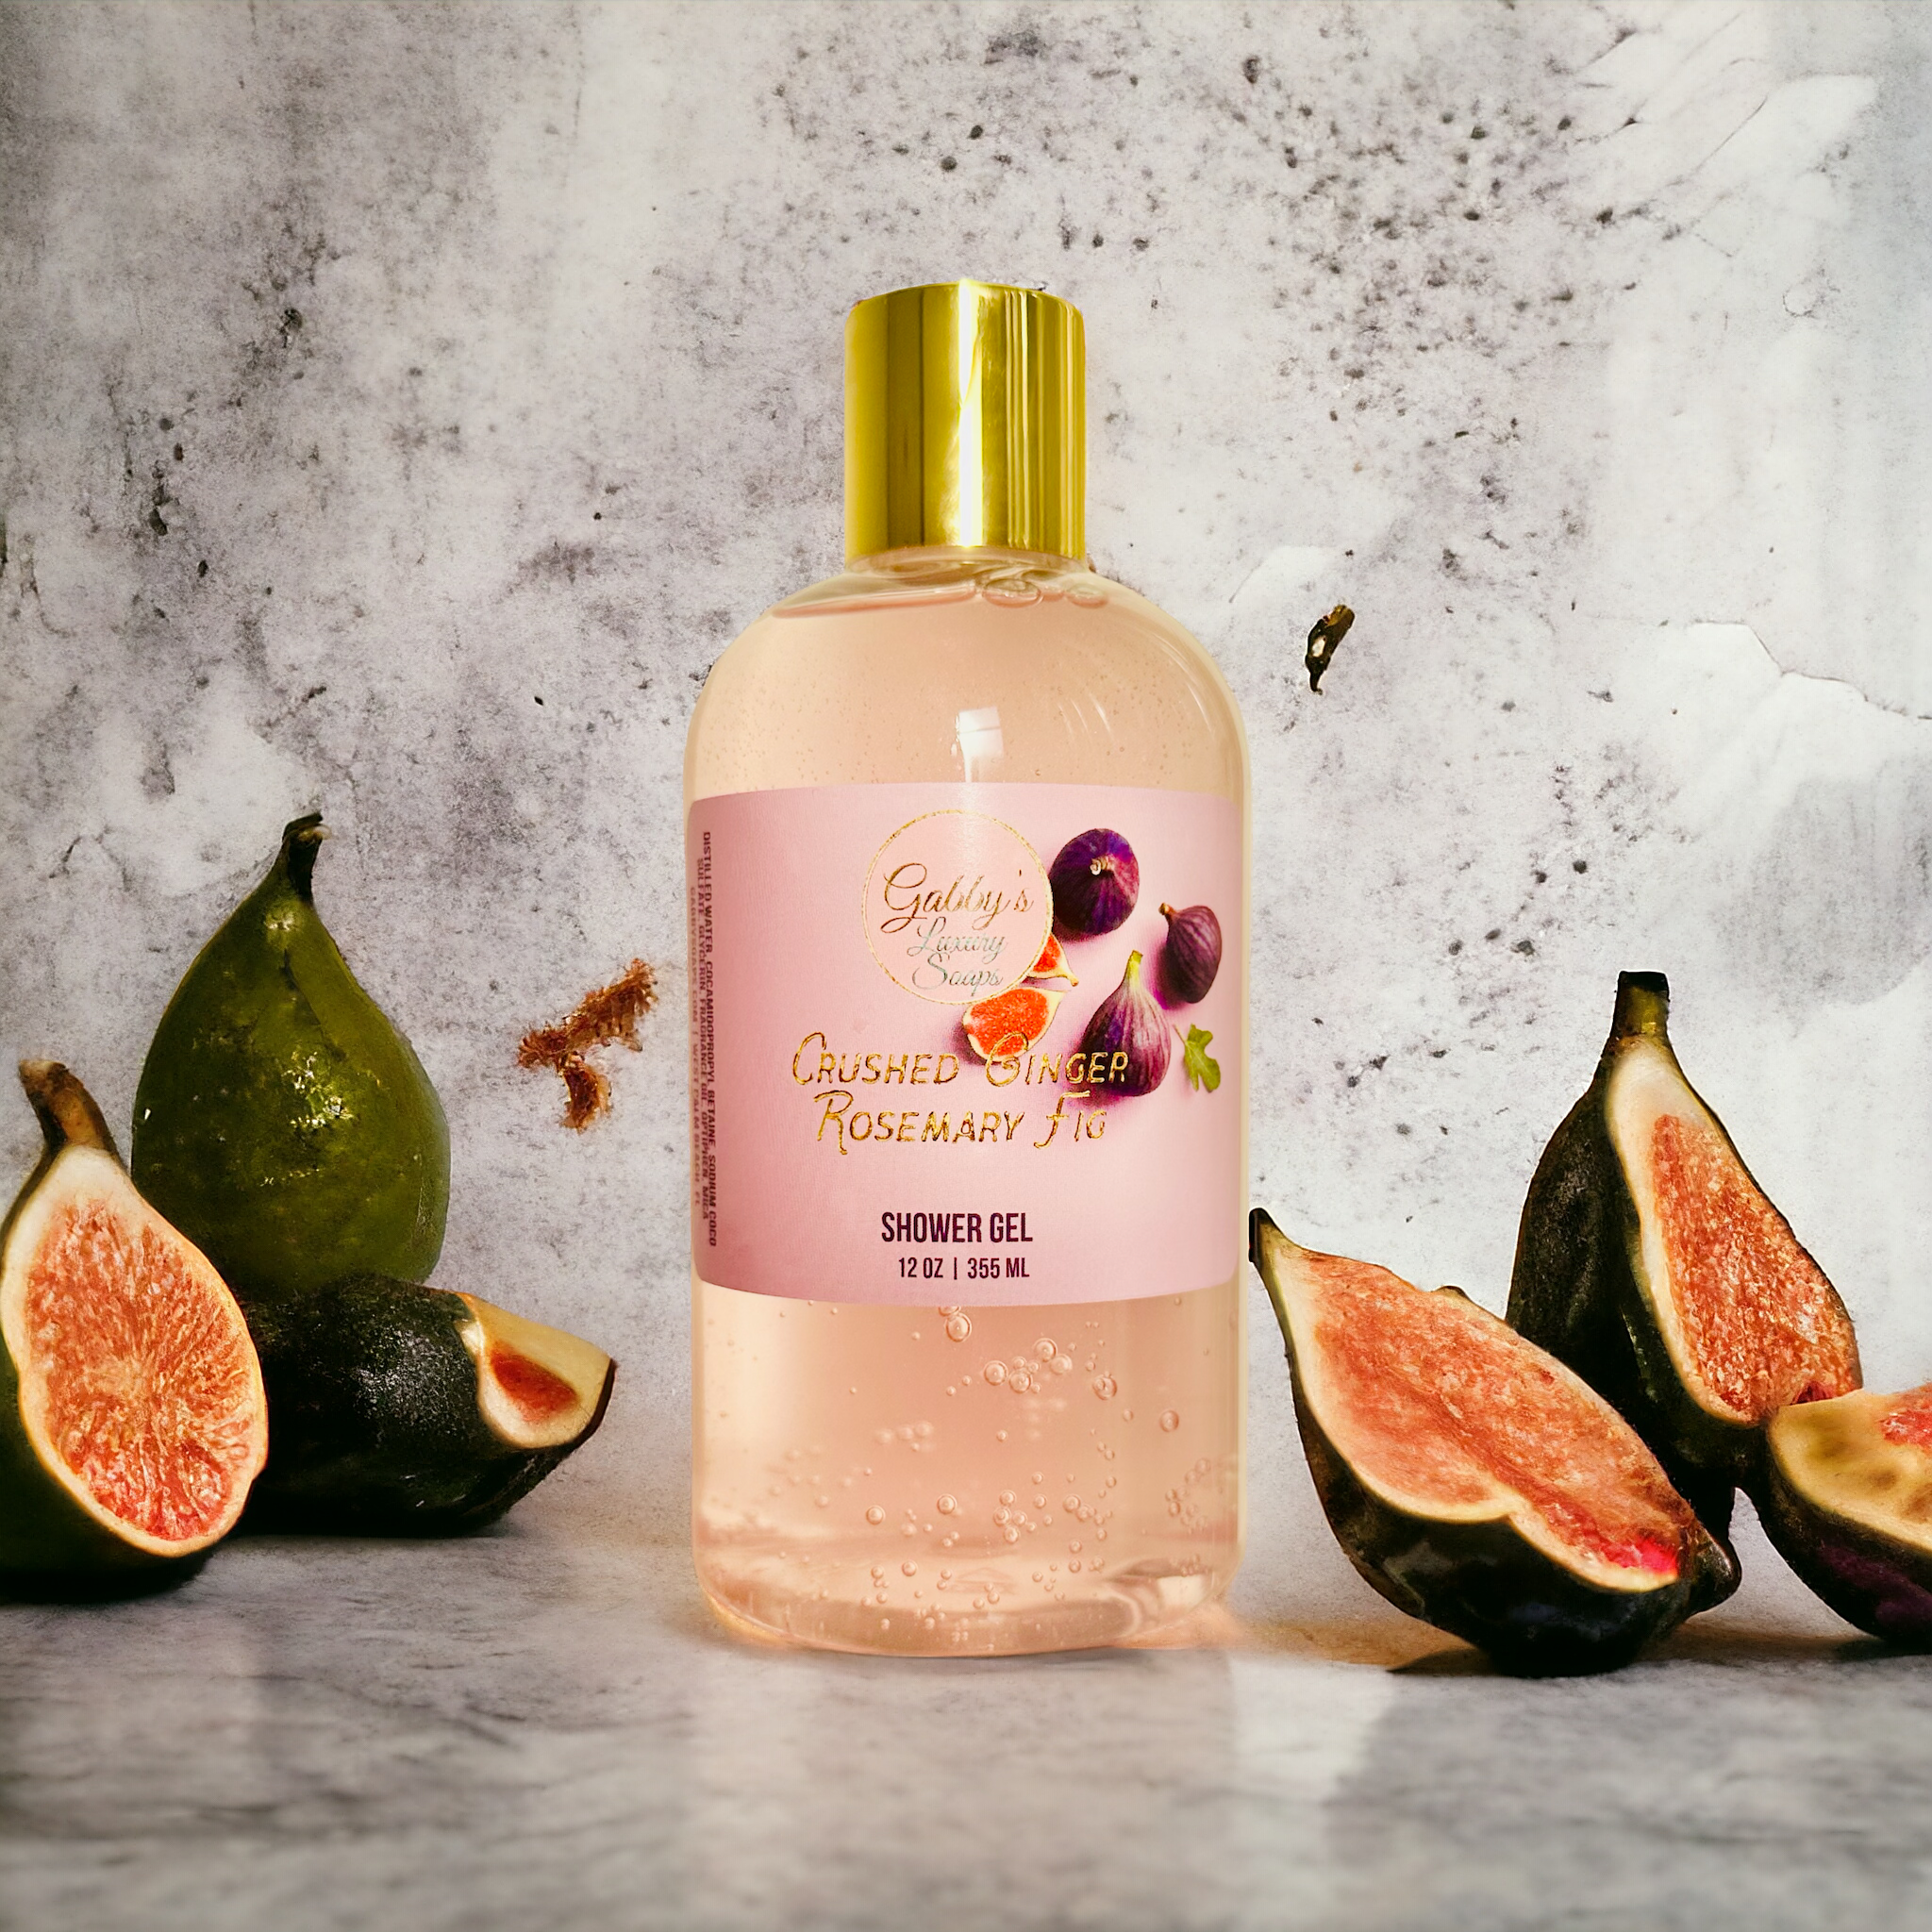 Crushed Ginger Rosemary Fig Bath and Shower Gel photo